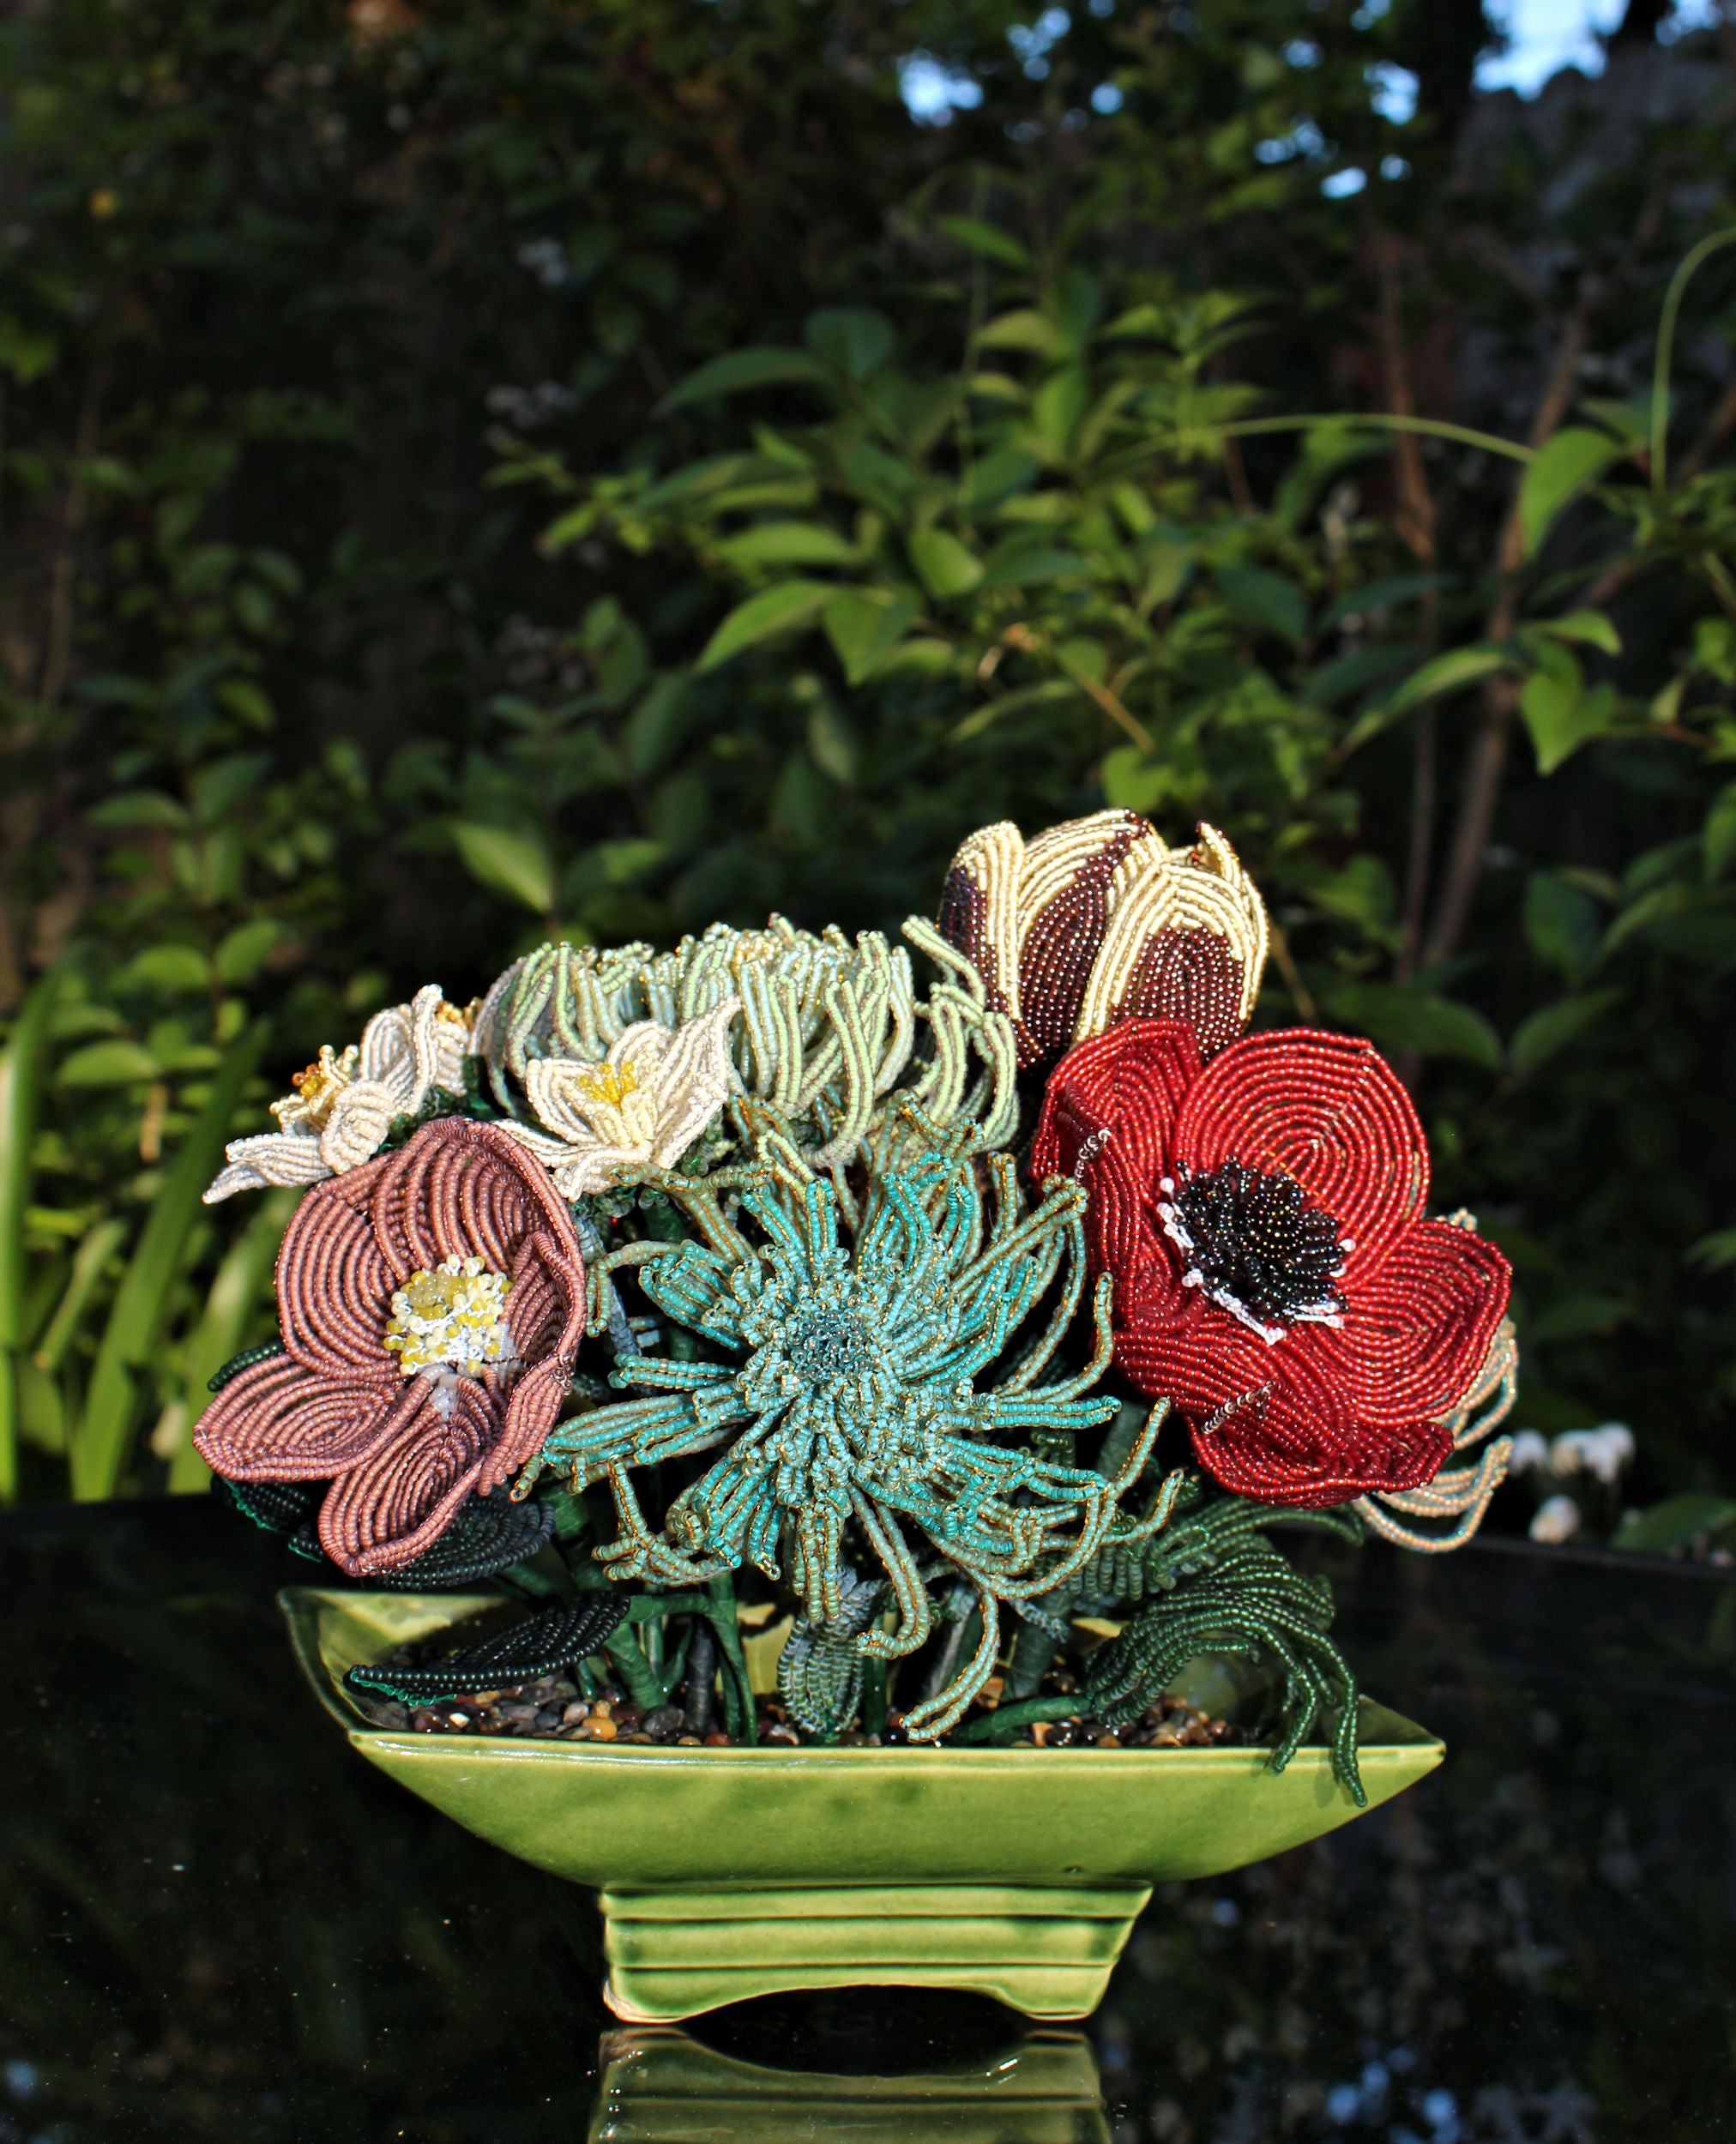 Greer Garson (Spider Mums, Tulip, Poppies, Paperwhites, and Beach Rose) - SOLD